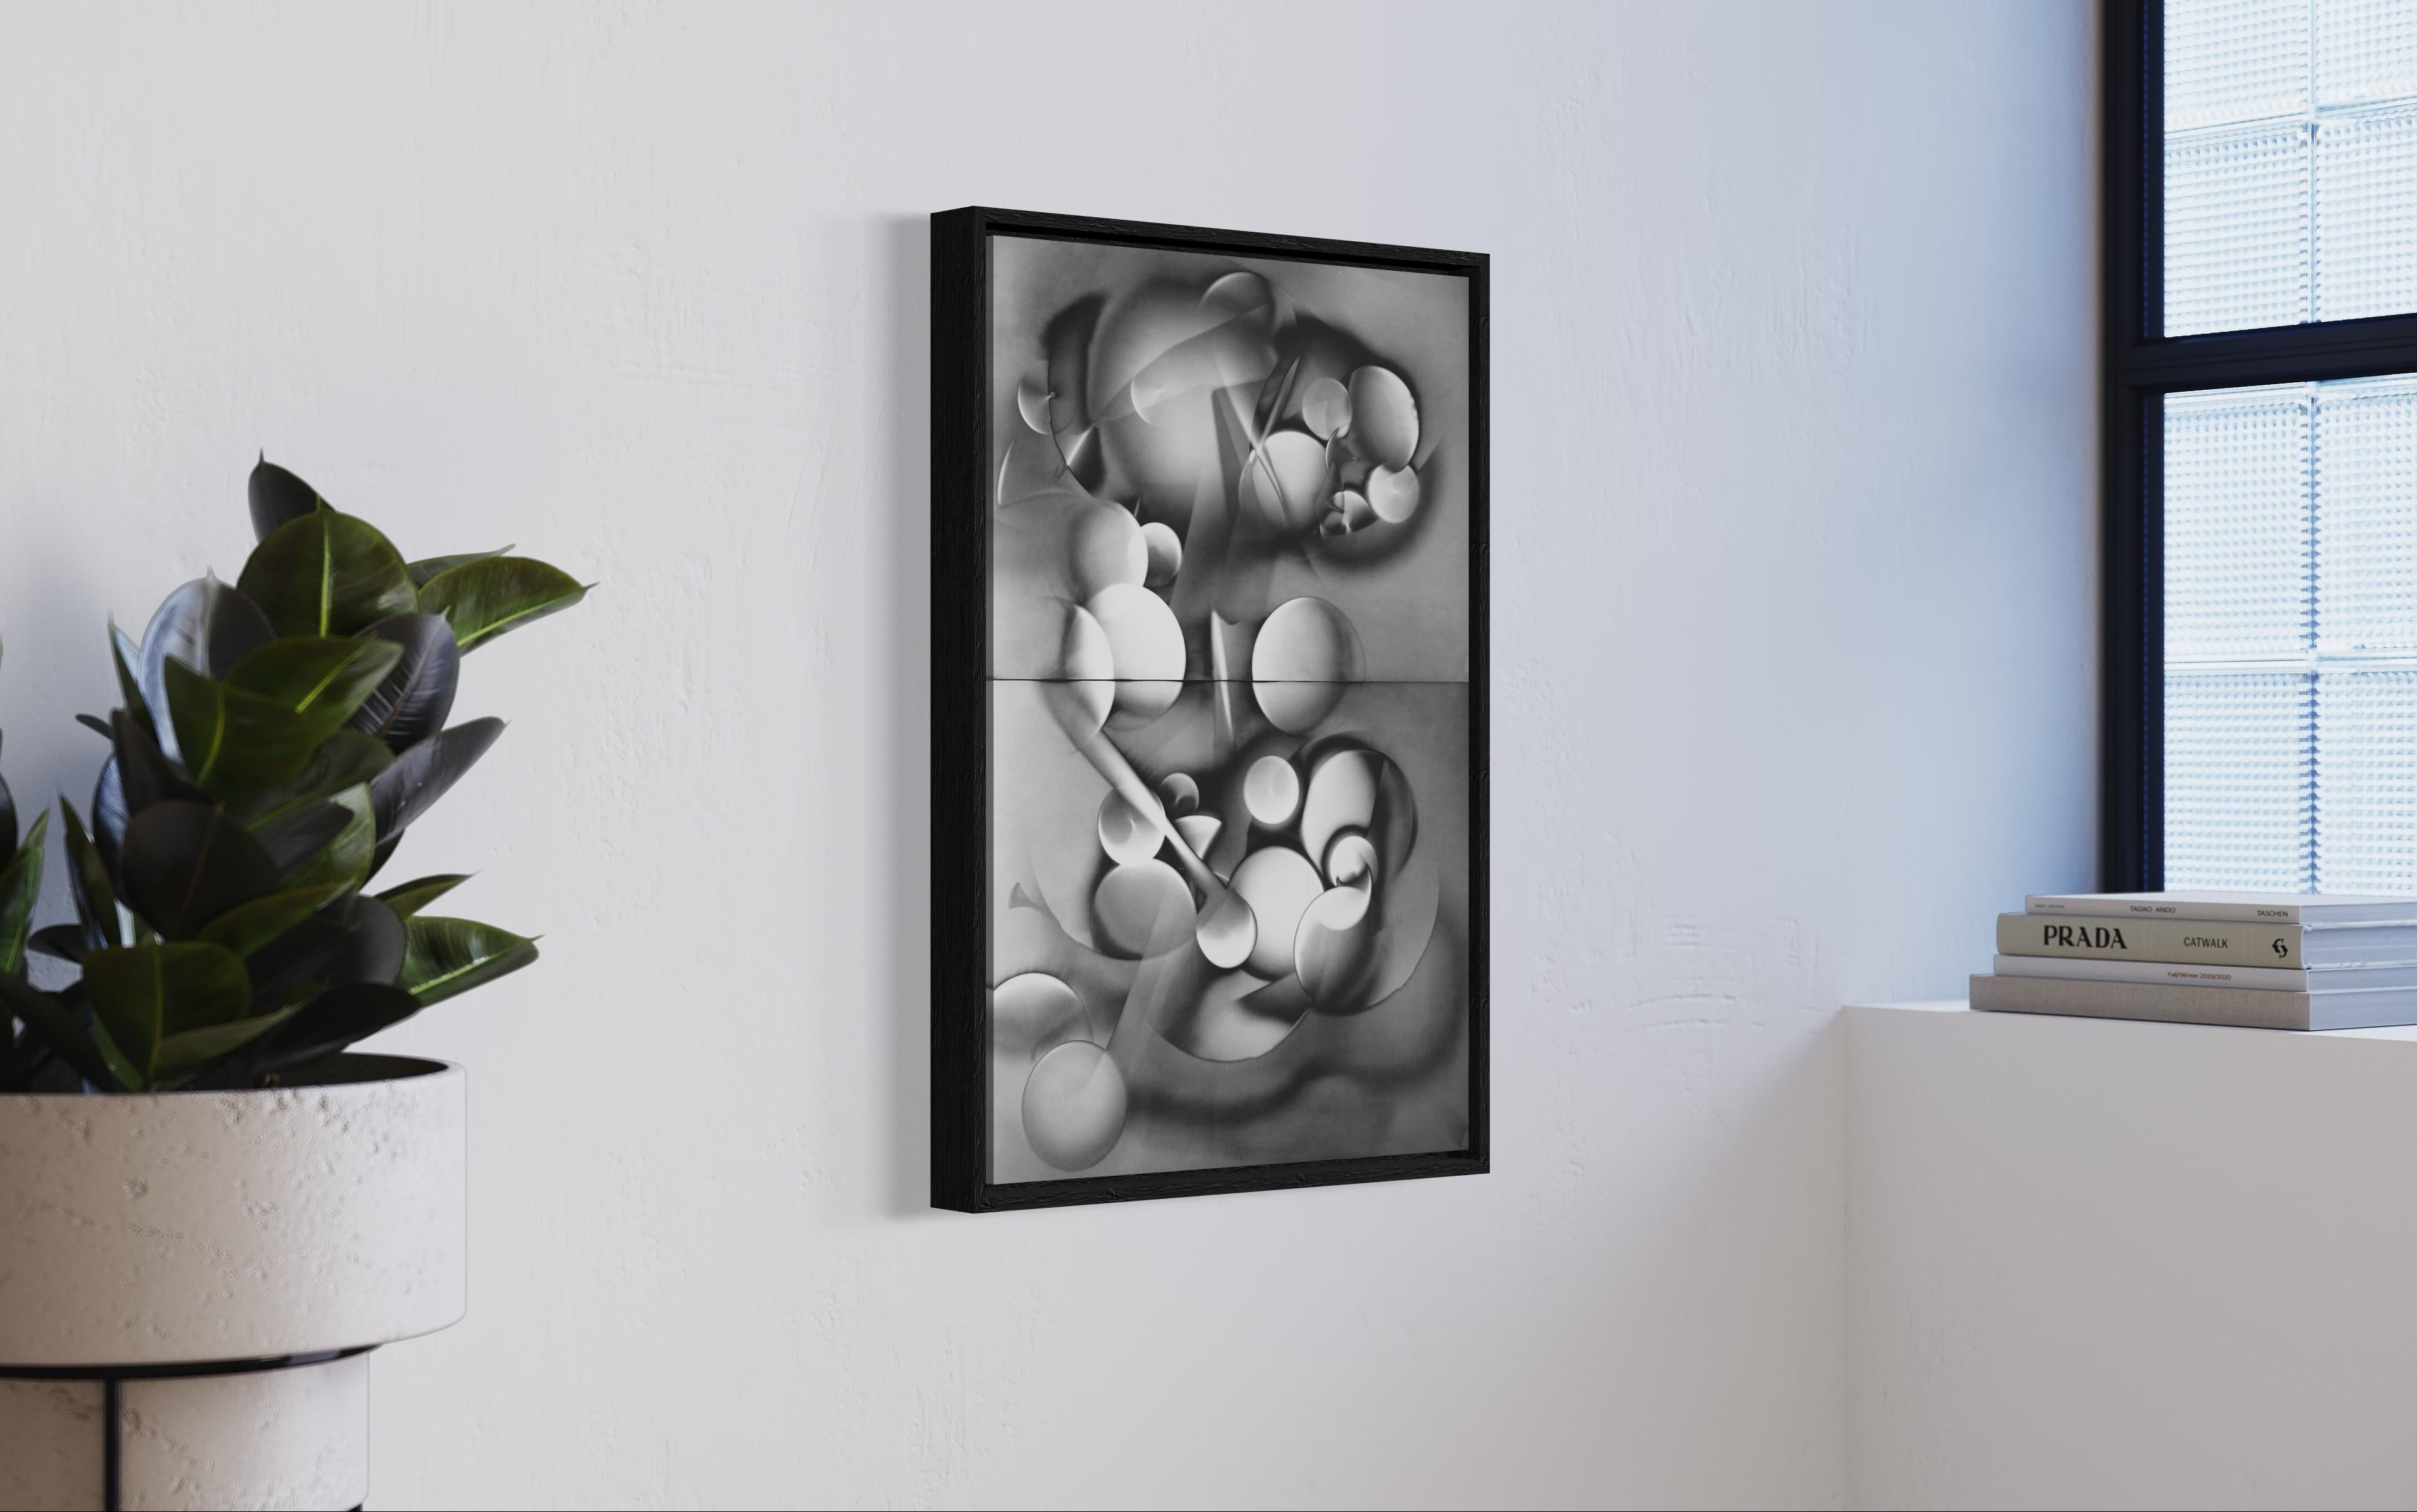  The Self Representation of Light #412, 2 x Luminograms as one work For Sale 4